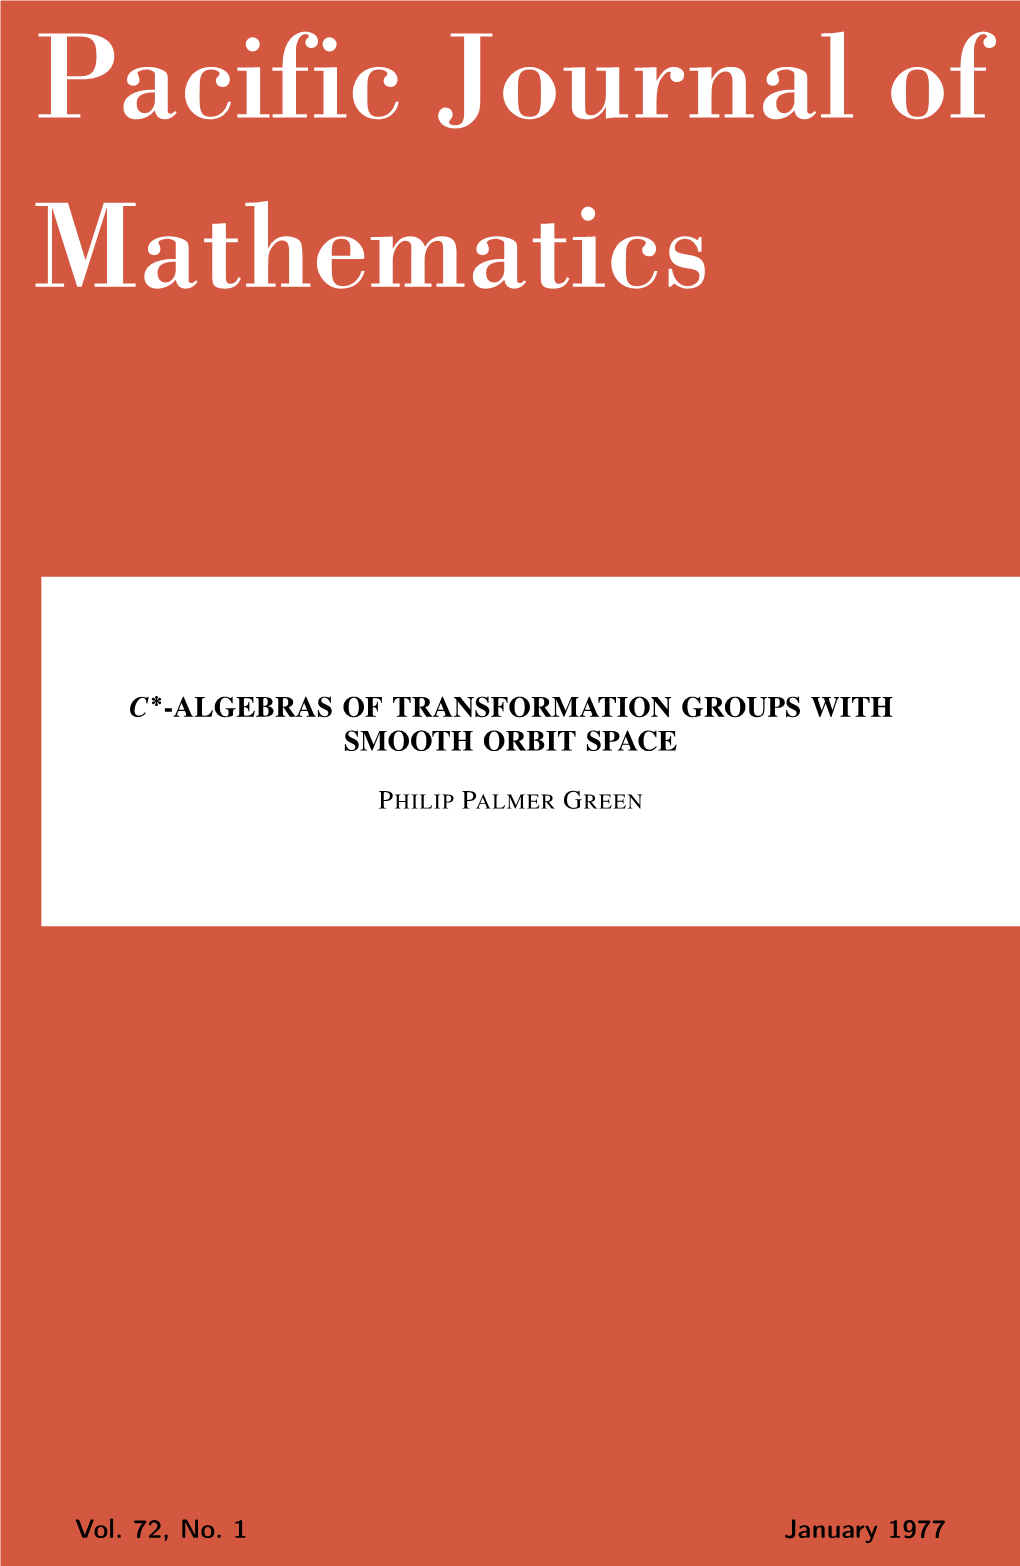 C*-Algebras of Transformation Groups with Smooth Orbit Space